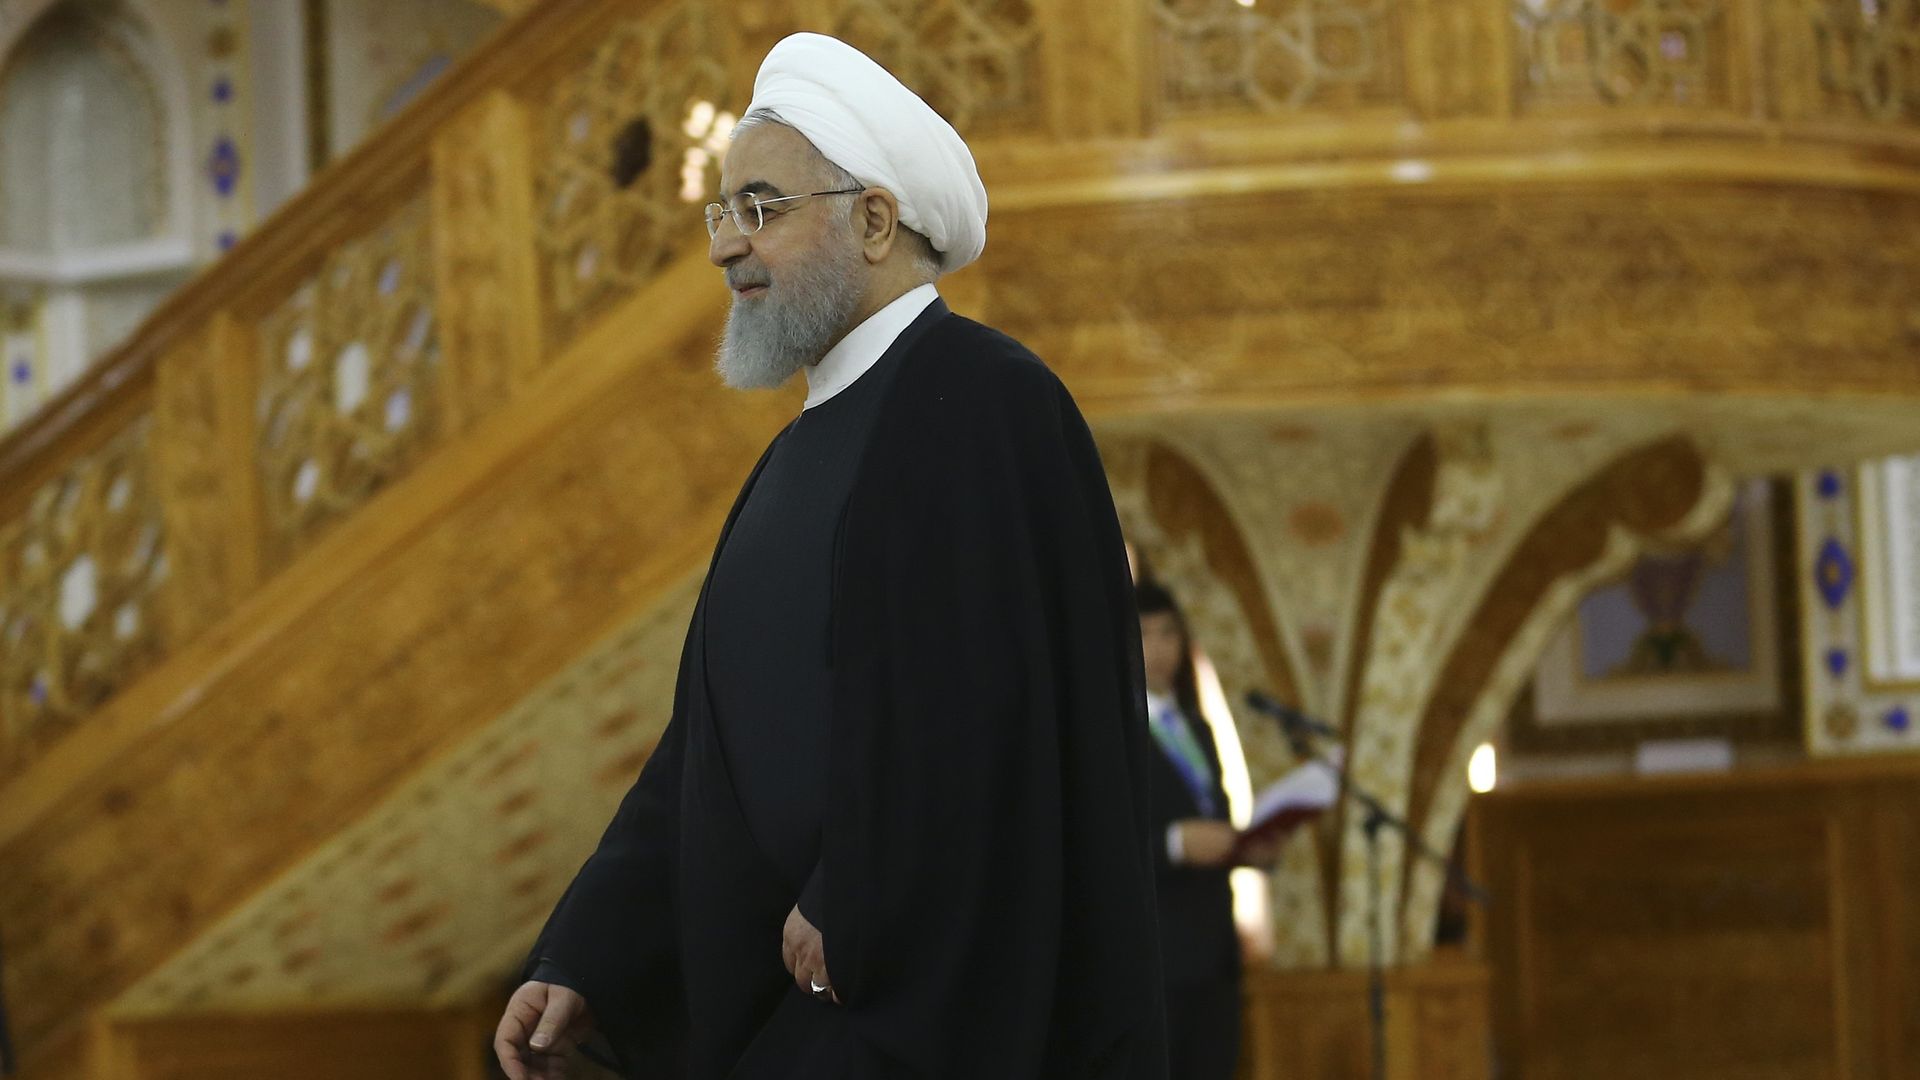 Hassan Rouhani walking through a room